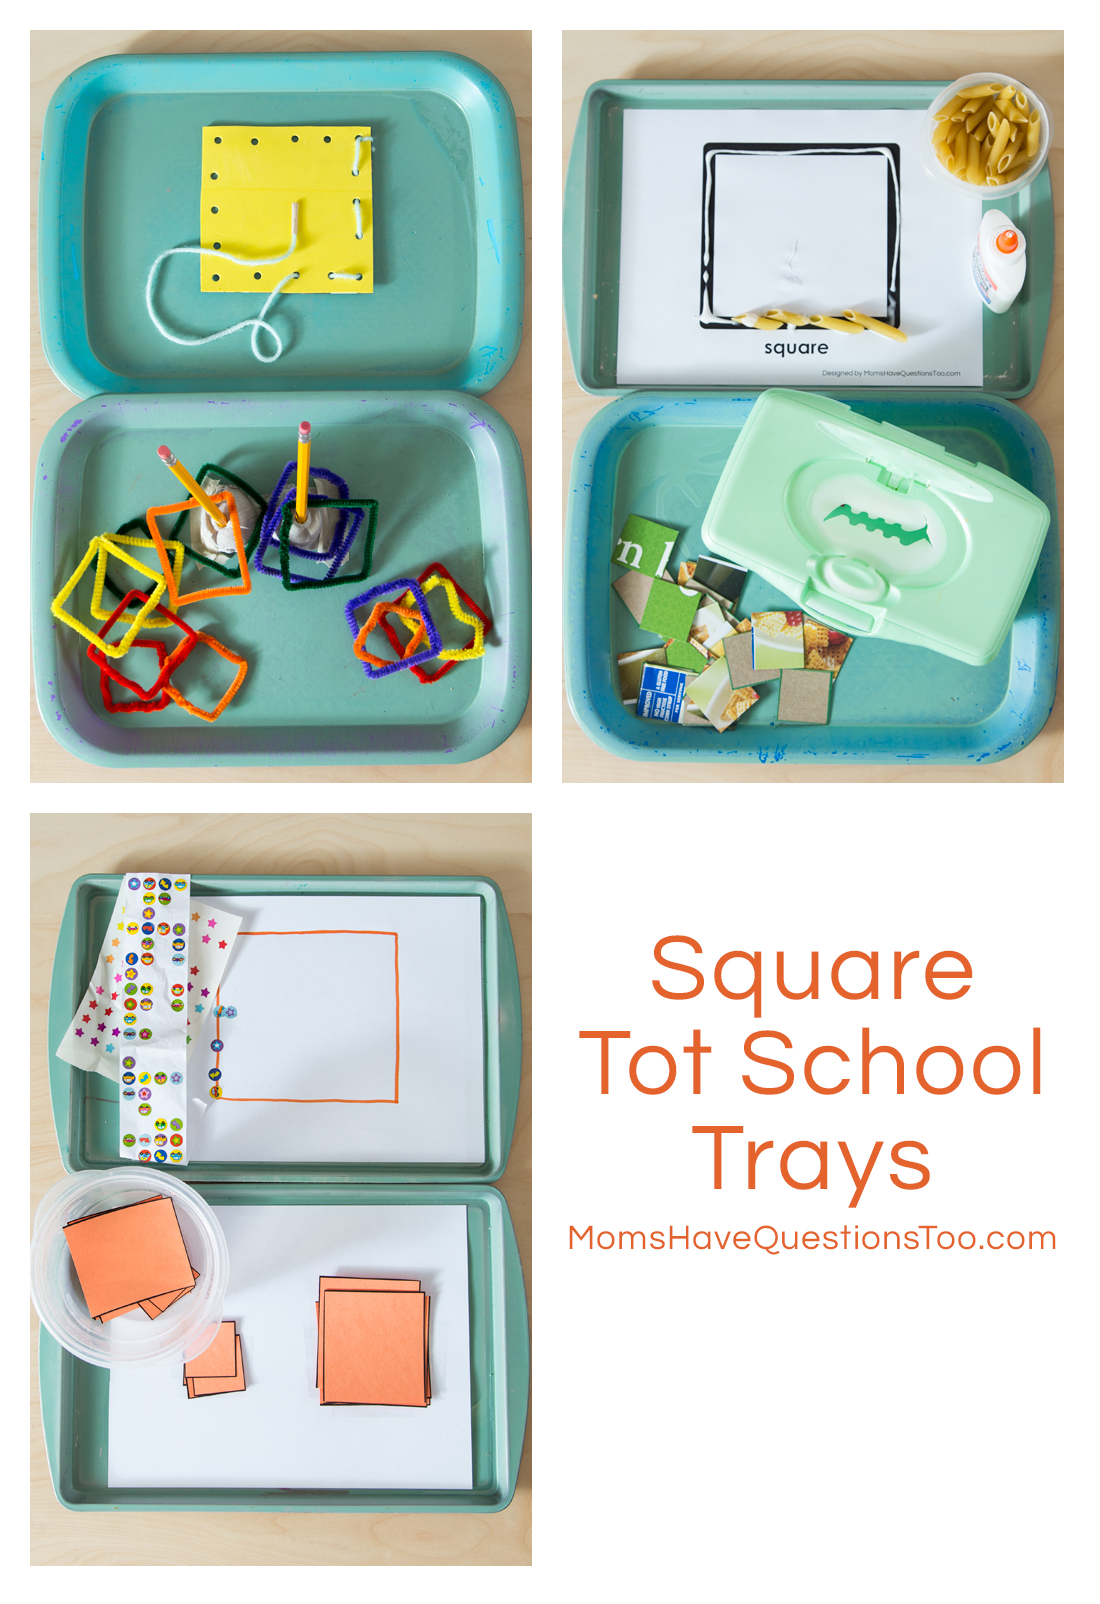 Square Tot School Trays Ideas - Moms Have Questions Too